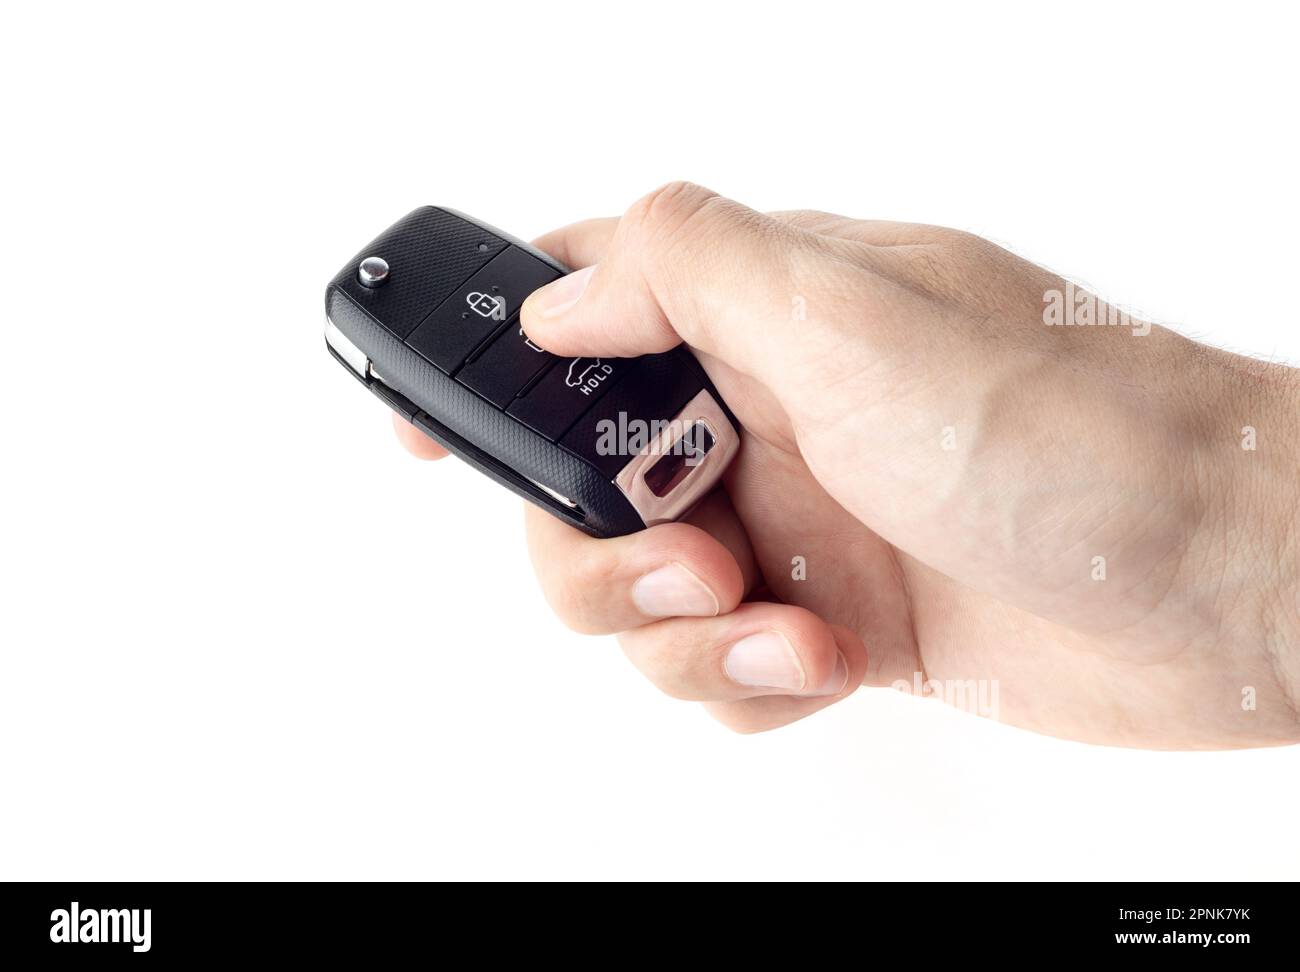 Unlocking a car with button on the keychain. Man's hand holds car key on white background close up. Stock Photo